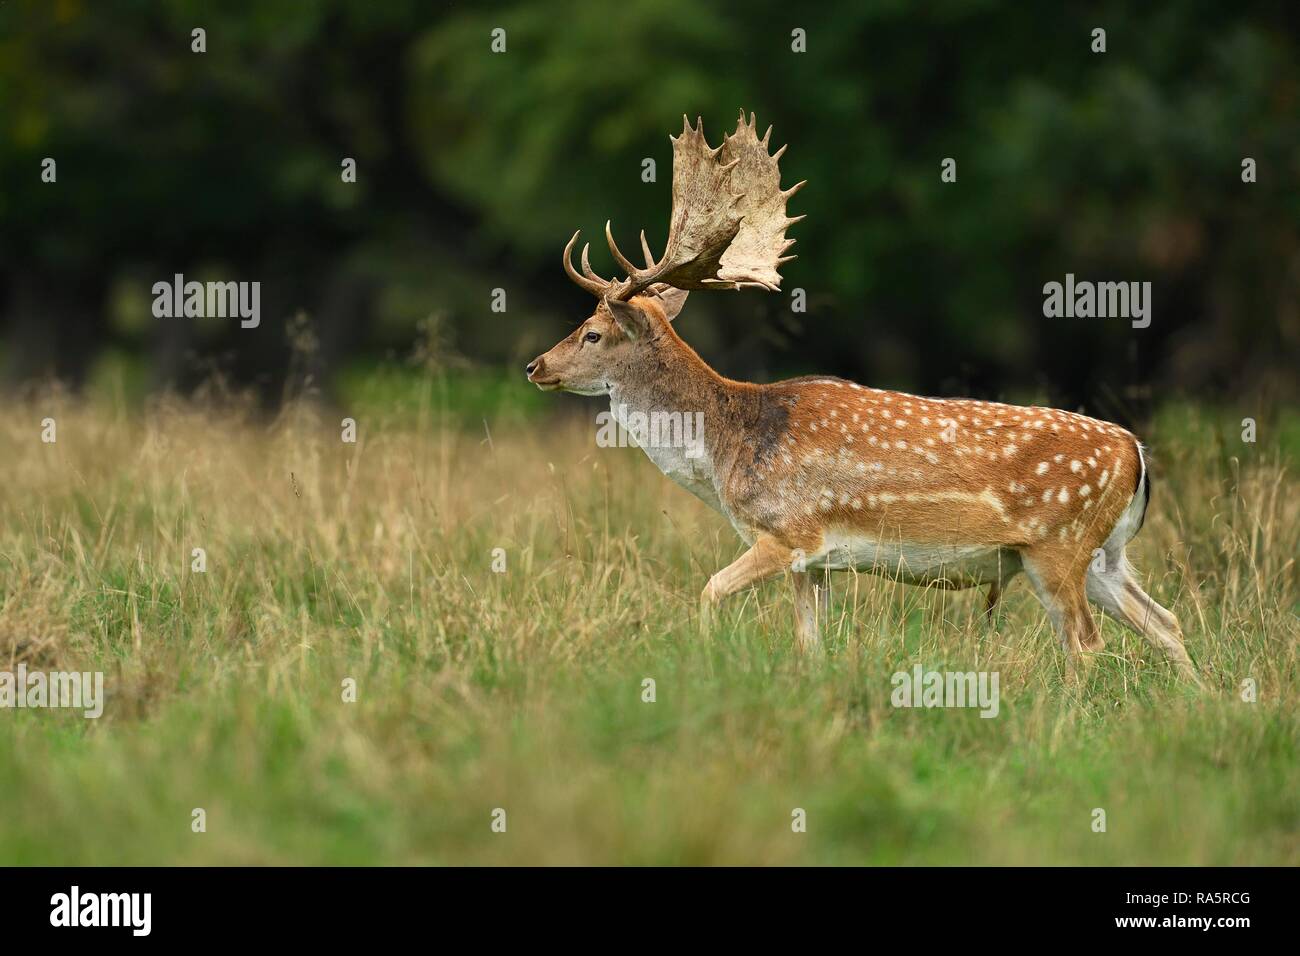 Fallow deer (Dama dama), capital stag walking through grass at the edge of the forest, Jaegersborg Deer Park, Denmark Stock Photo